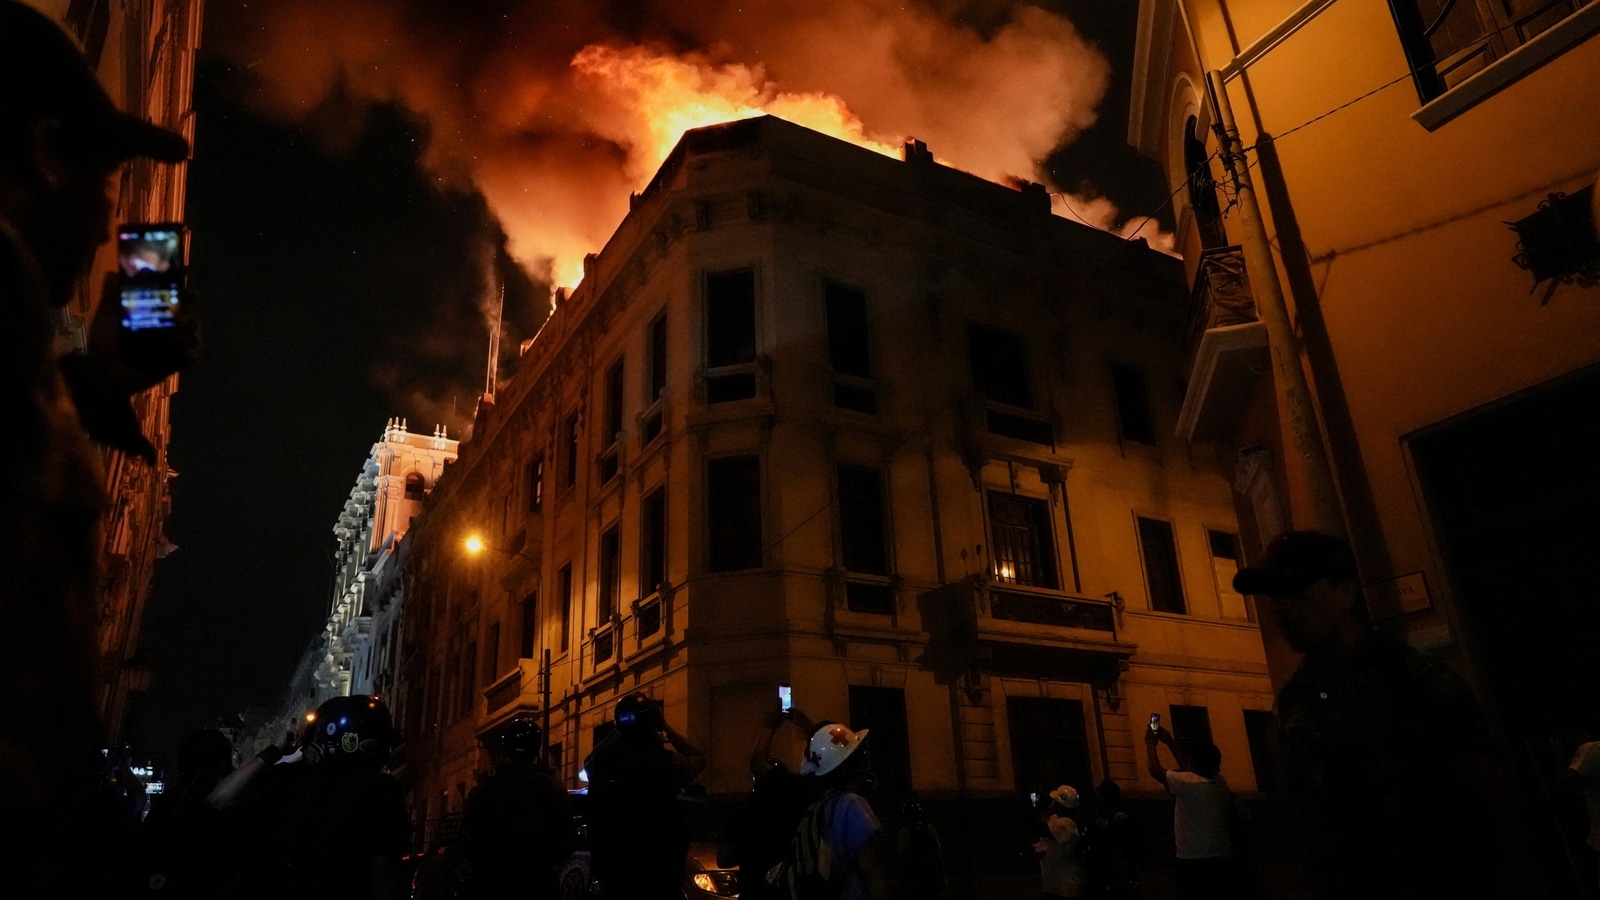 Thousands march on Peru's capital as unrest spreads, building set ablaze | Watch